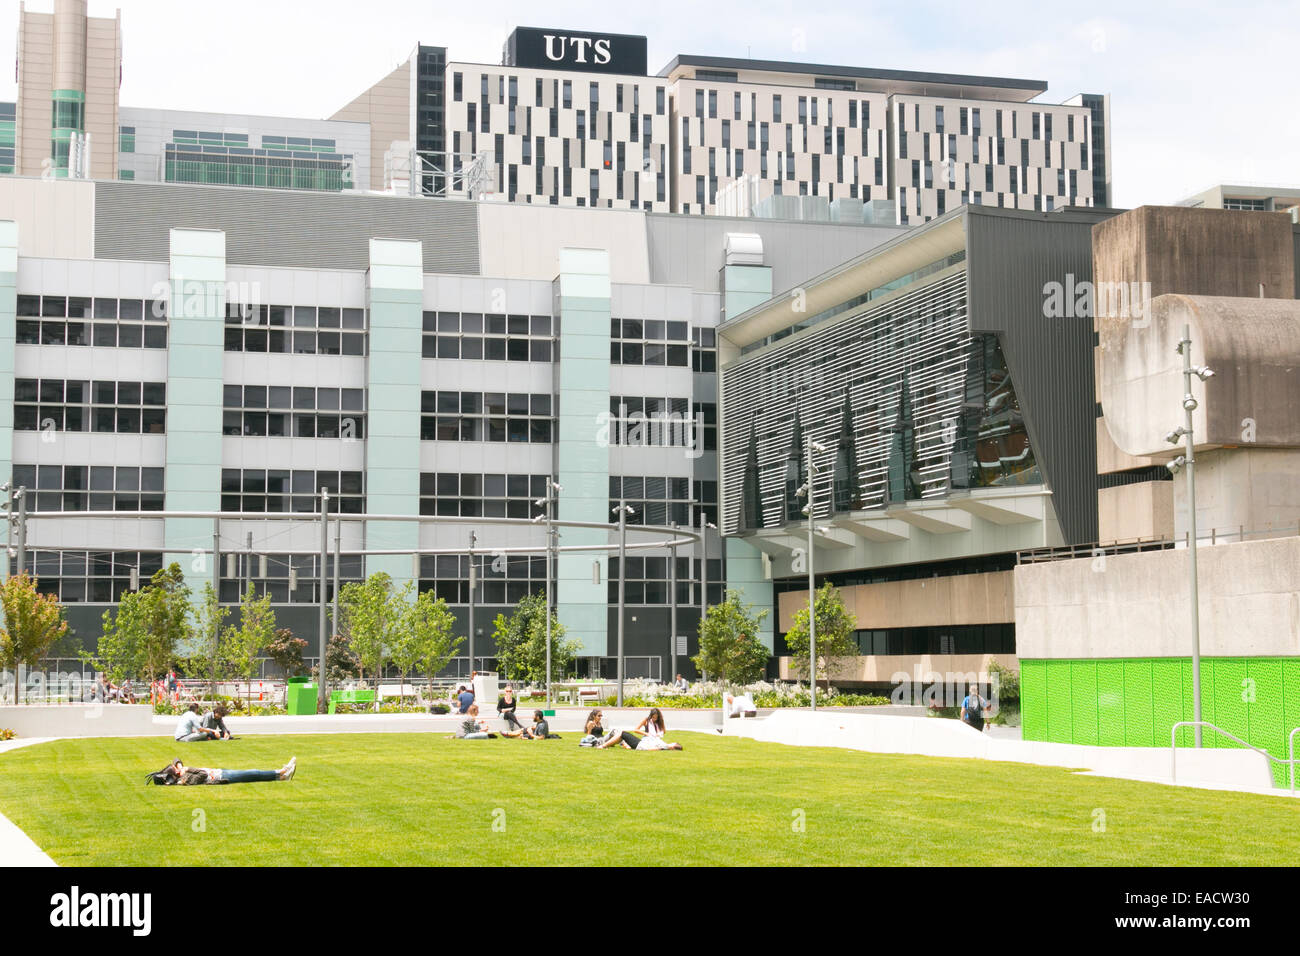 UTS or University of technology Sydney, campus and facilities in Sydney,NSW, Australia Stock Photo